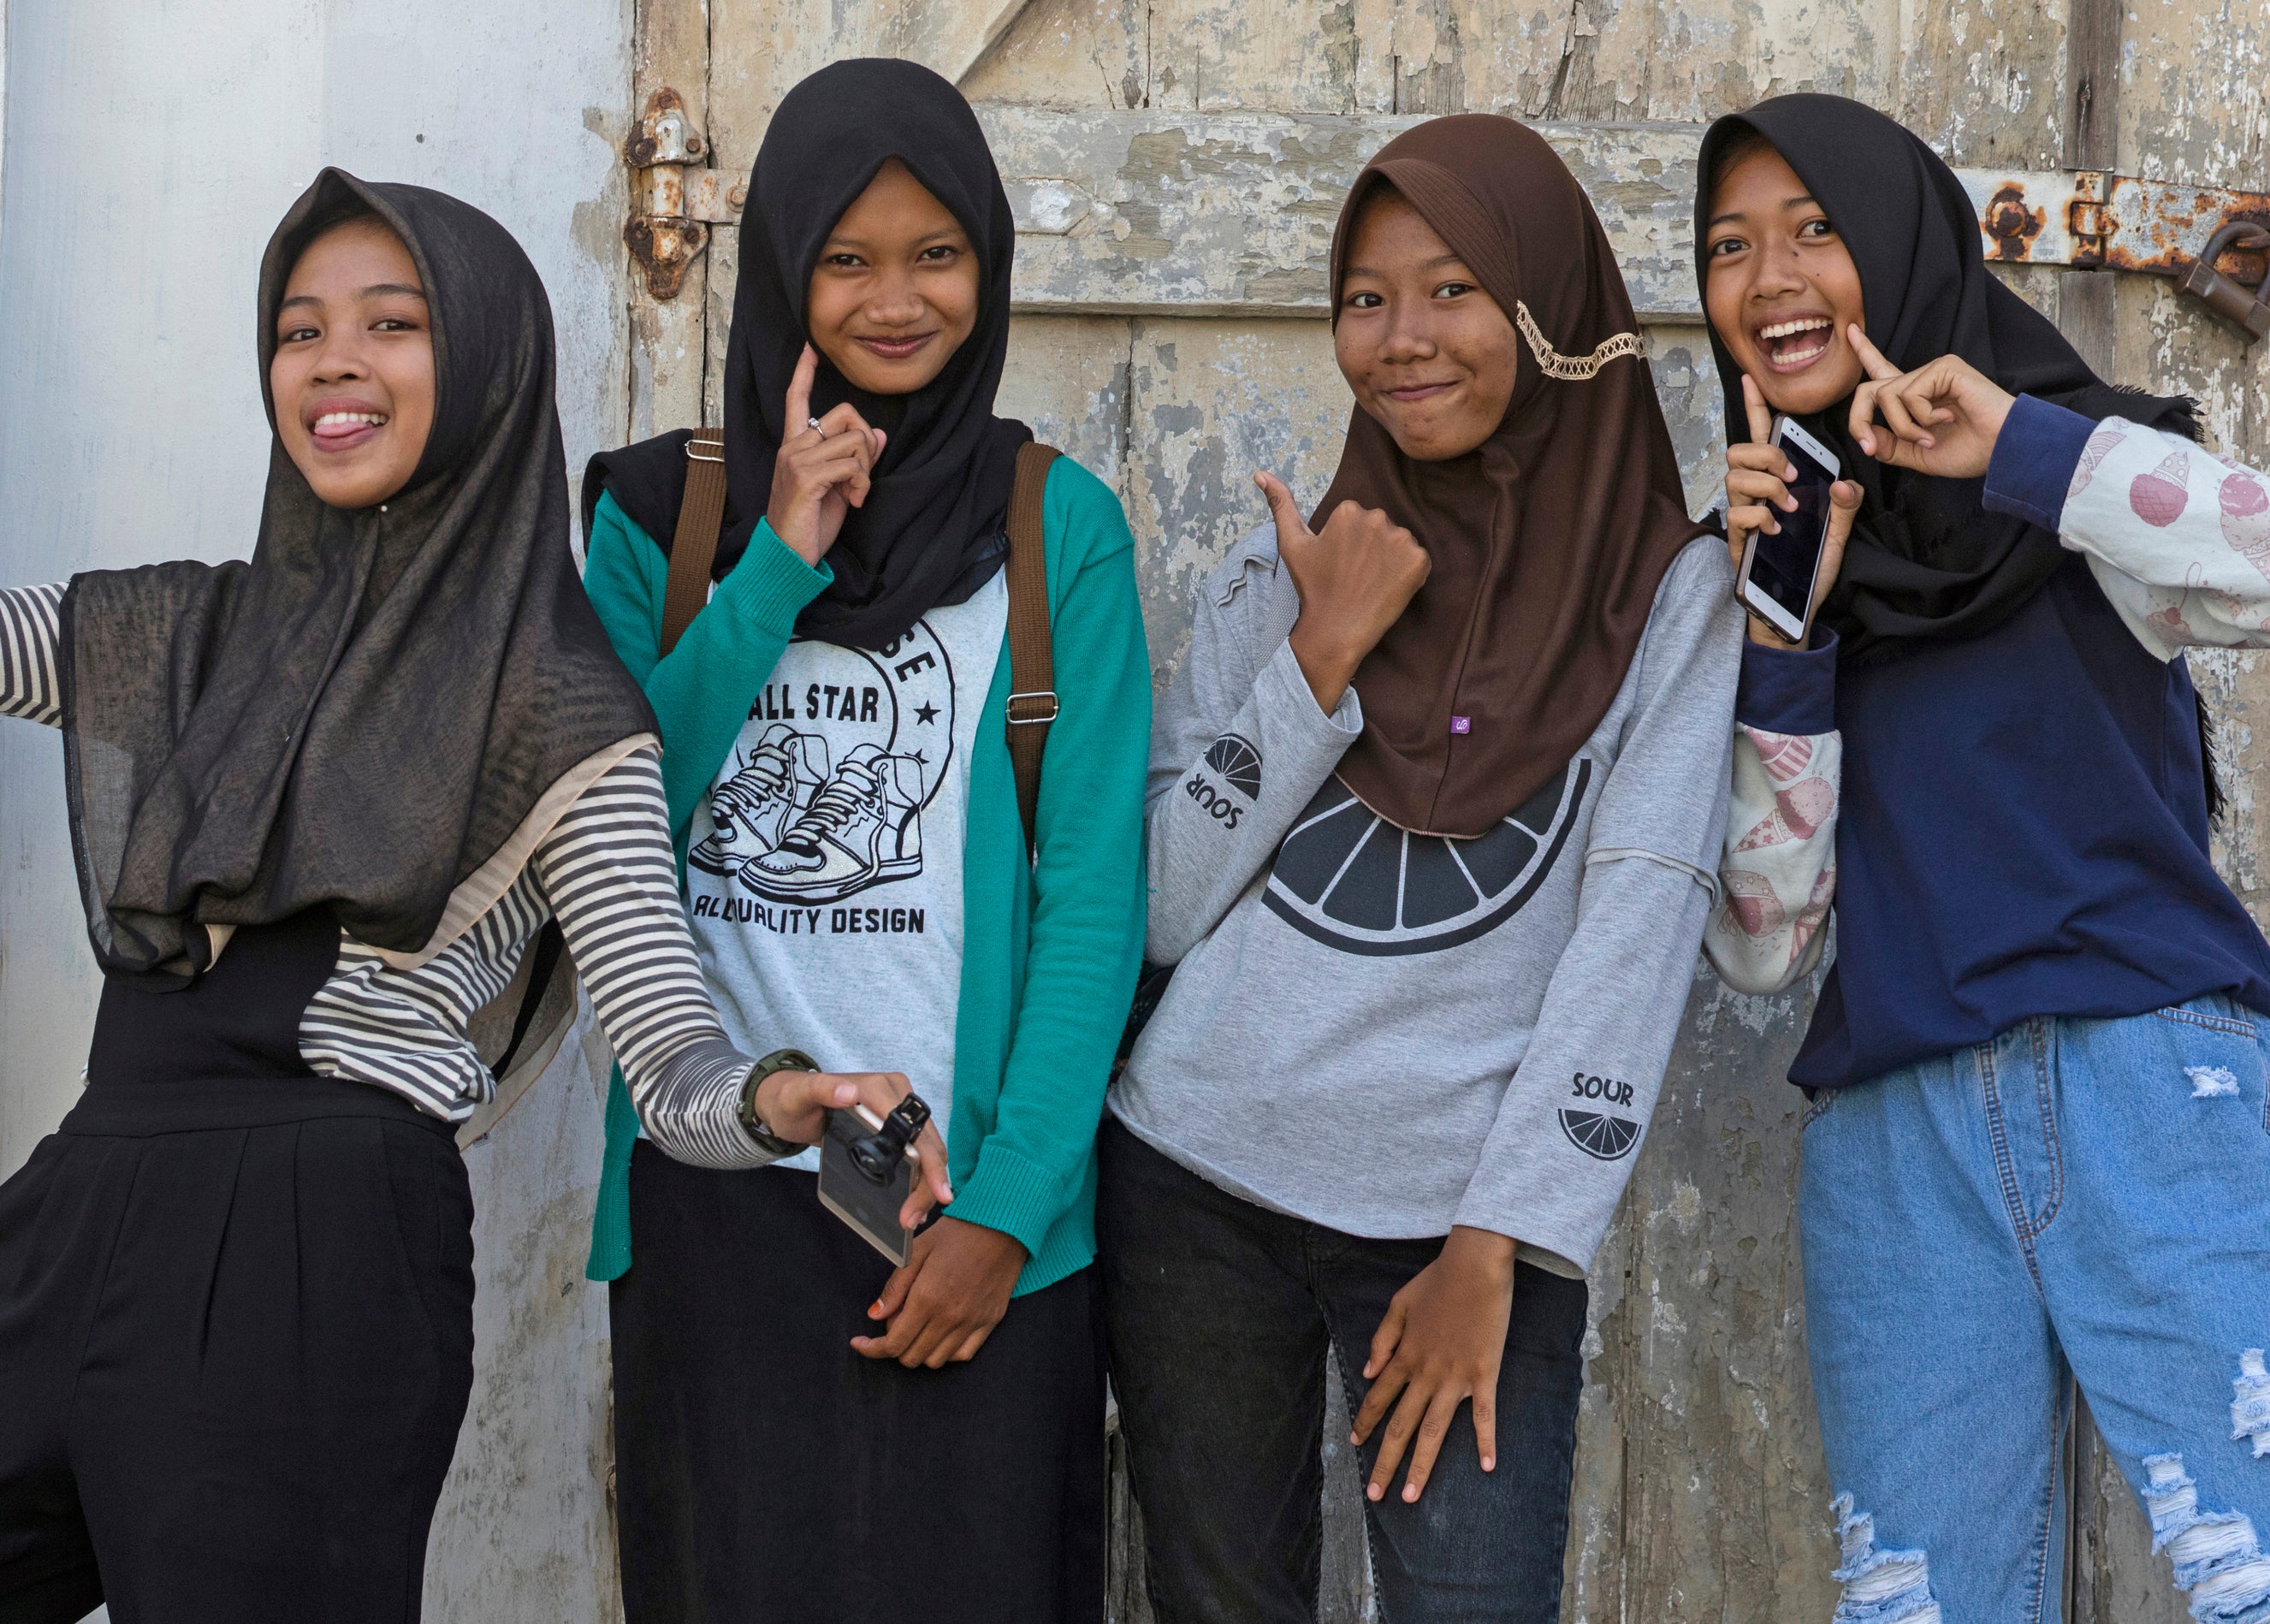 Four girls posing with smiles against a wall, one making a peace sign, others with playful gestures